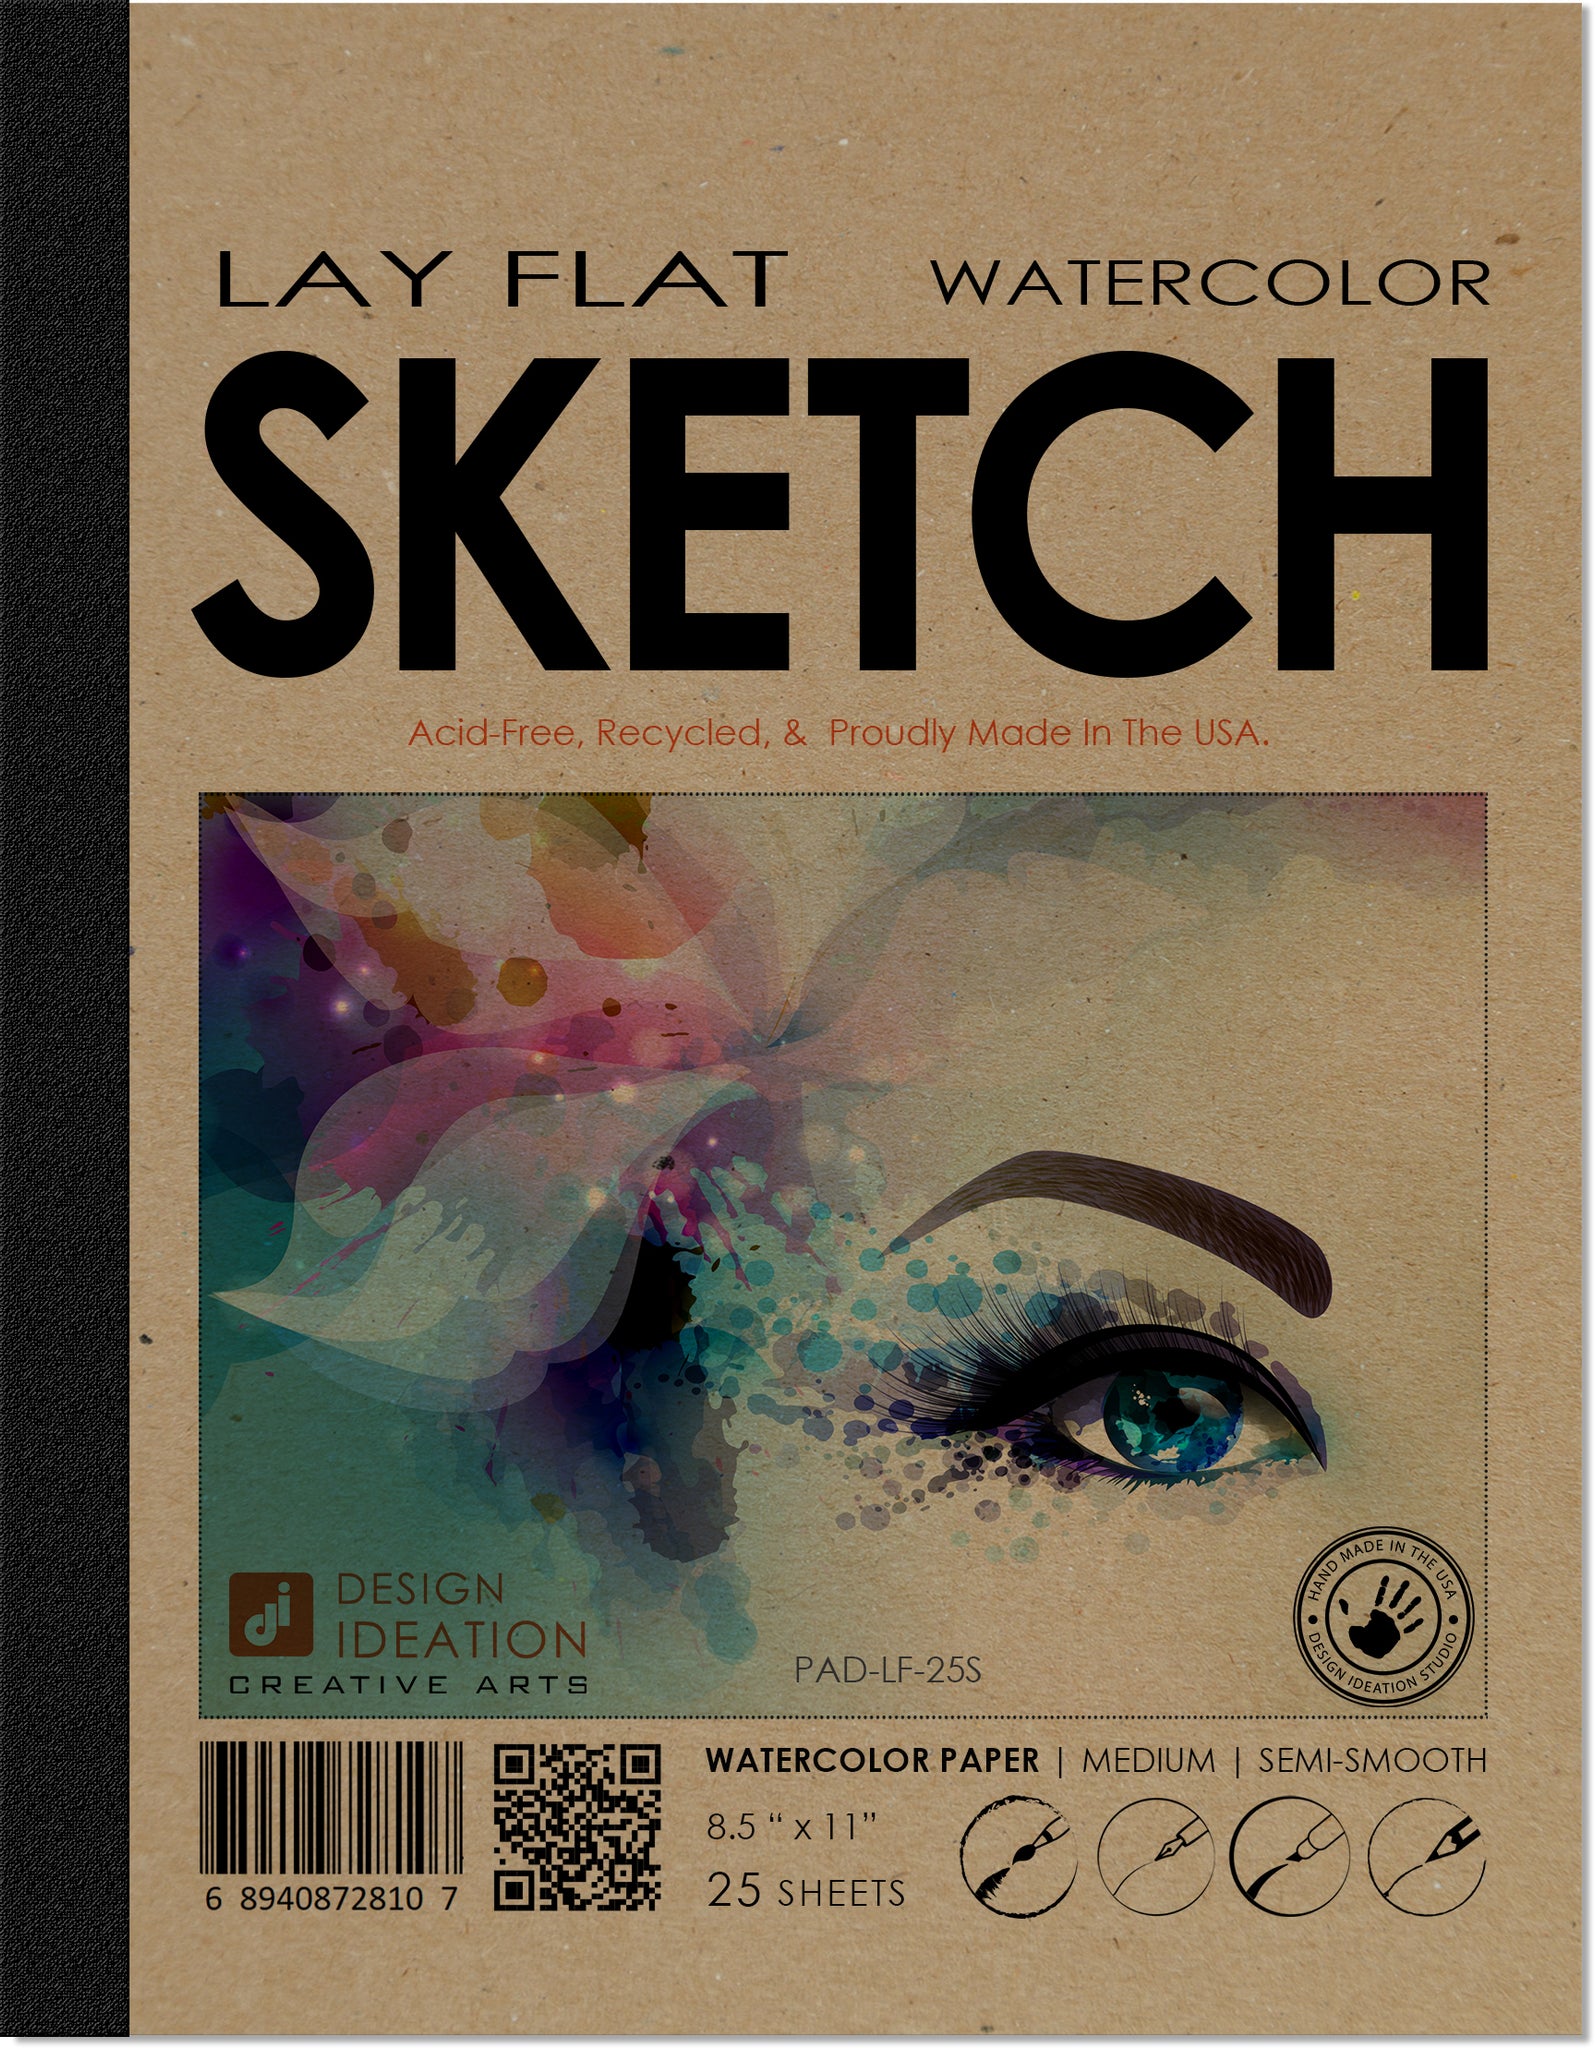 Sketchbooks, watercolor books, paper products